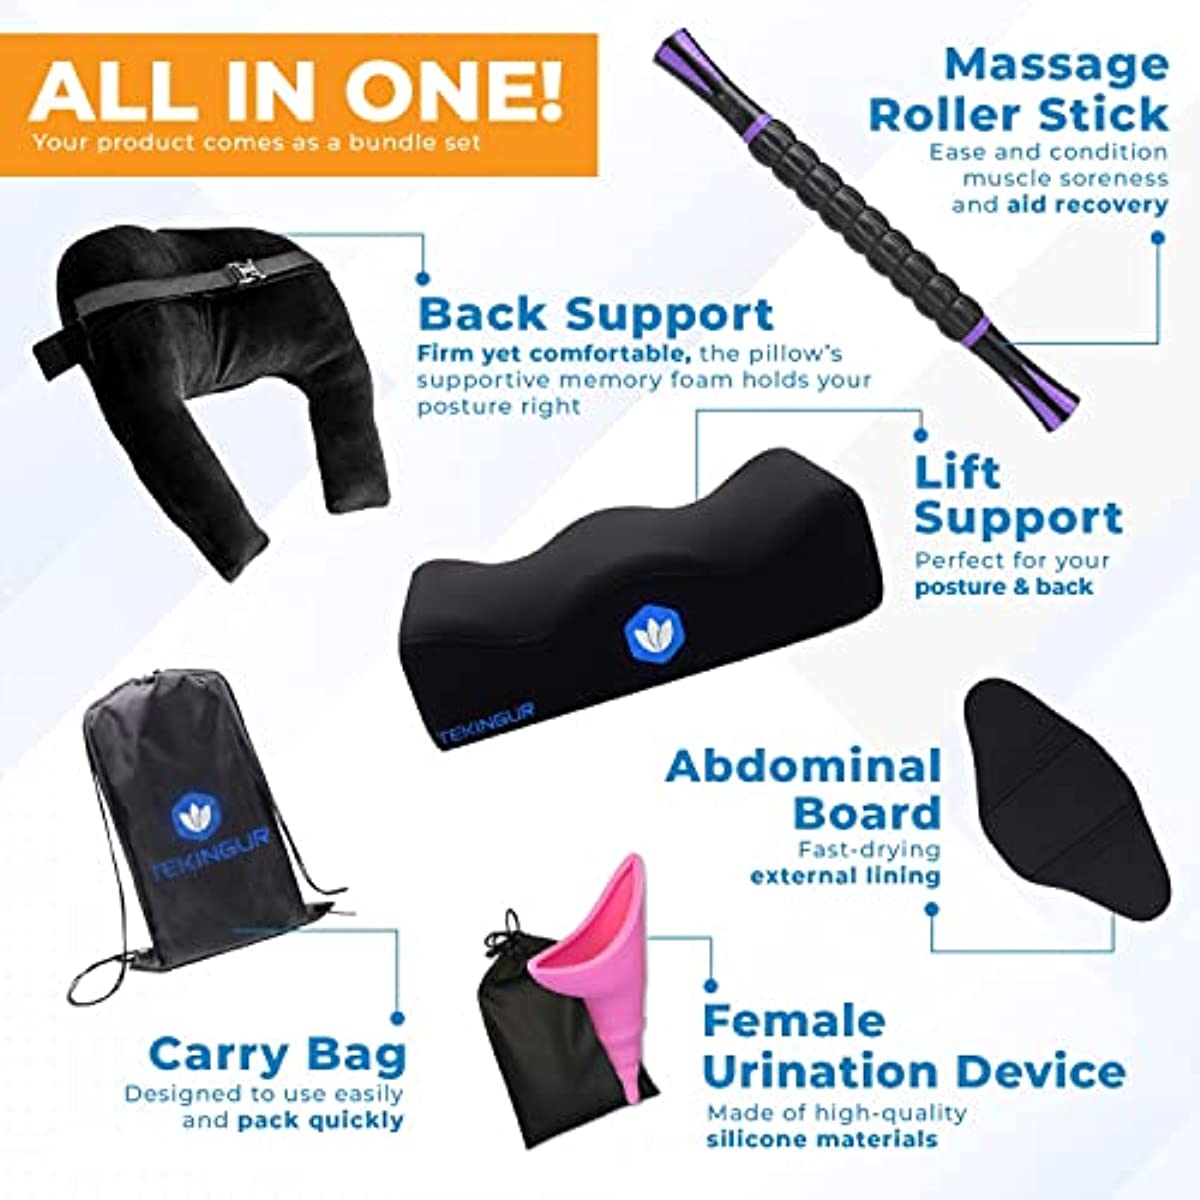 TEKINGUR BBL Pillow After Surgery for Butt & Back Support Cushion - BBL Post Surgery Supplies with Abdominal Board, Massage Stick, Urination Device and Carrier Bag for Maximum Sitting Comfort